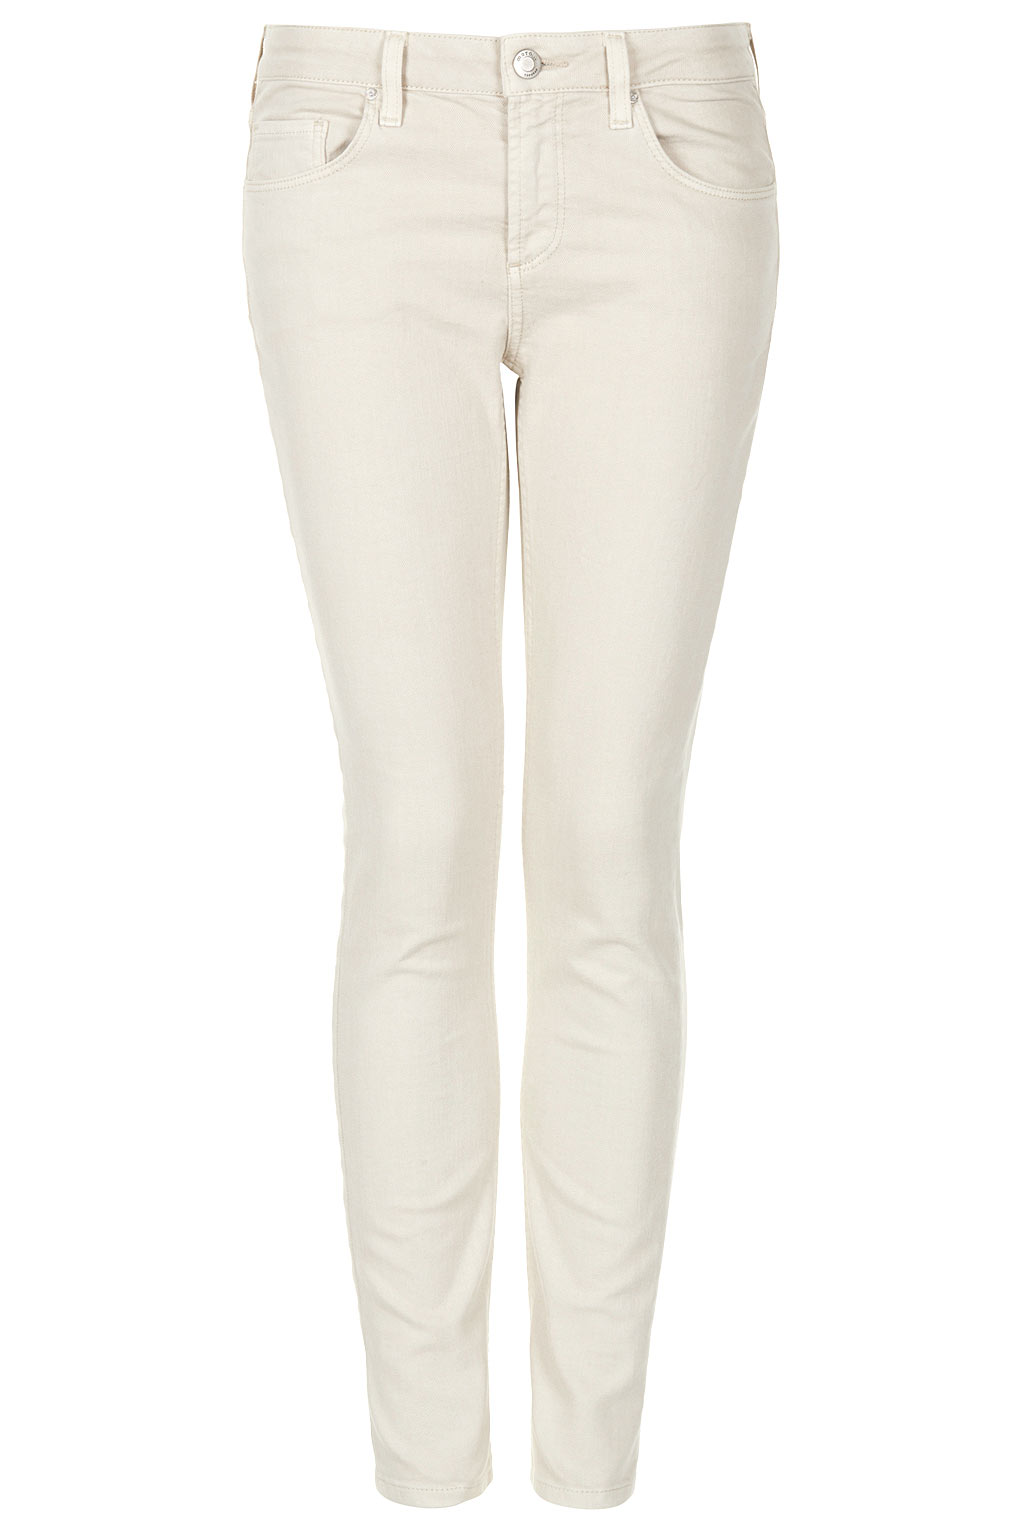 Topshop Cream Baxter Skinny Jeans In Natural Lyst 